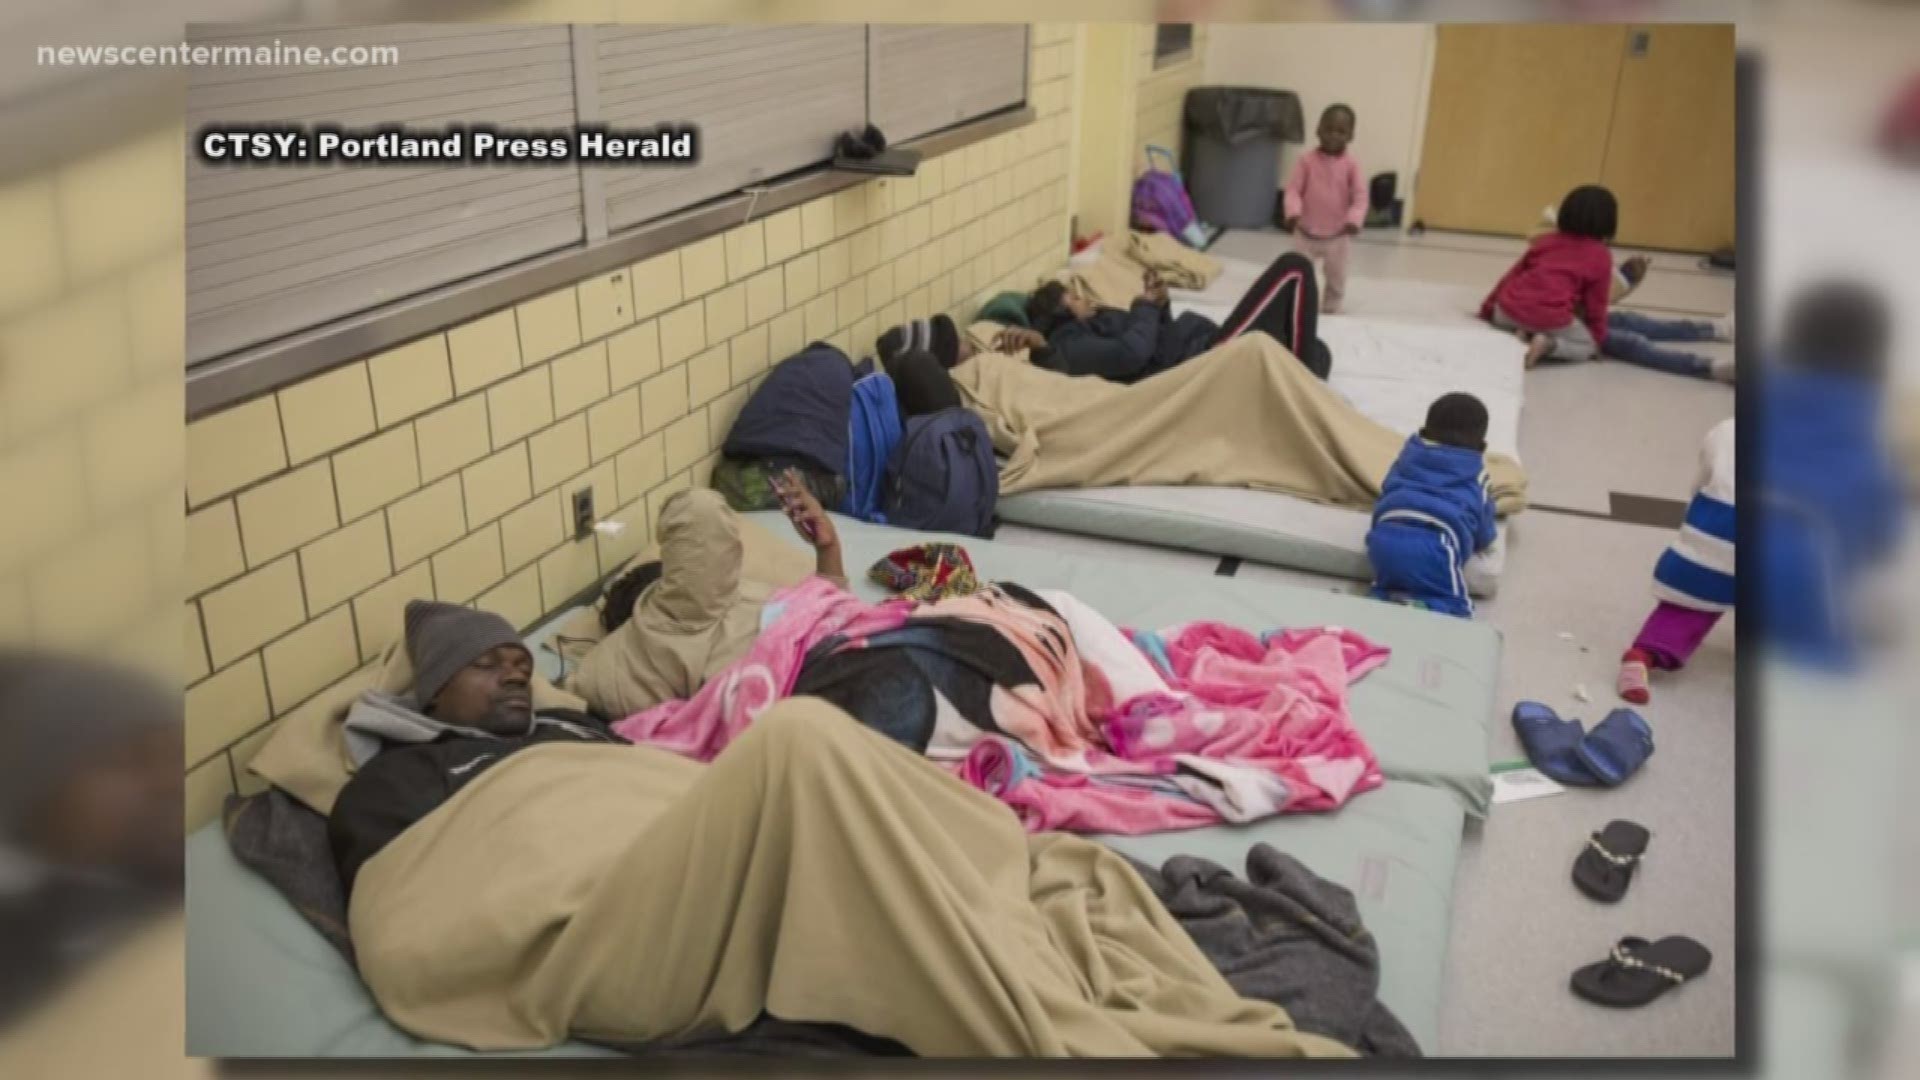 According to Portland officials, dozens of arrivals of asylum seekers are straining a shelter system that is already overcrowded. Just in the past few weeks, nearly 50 people have arrived seeking asylum in Portland.